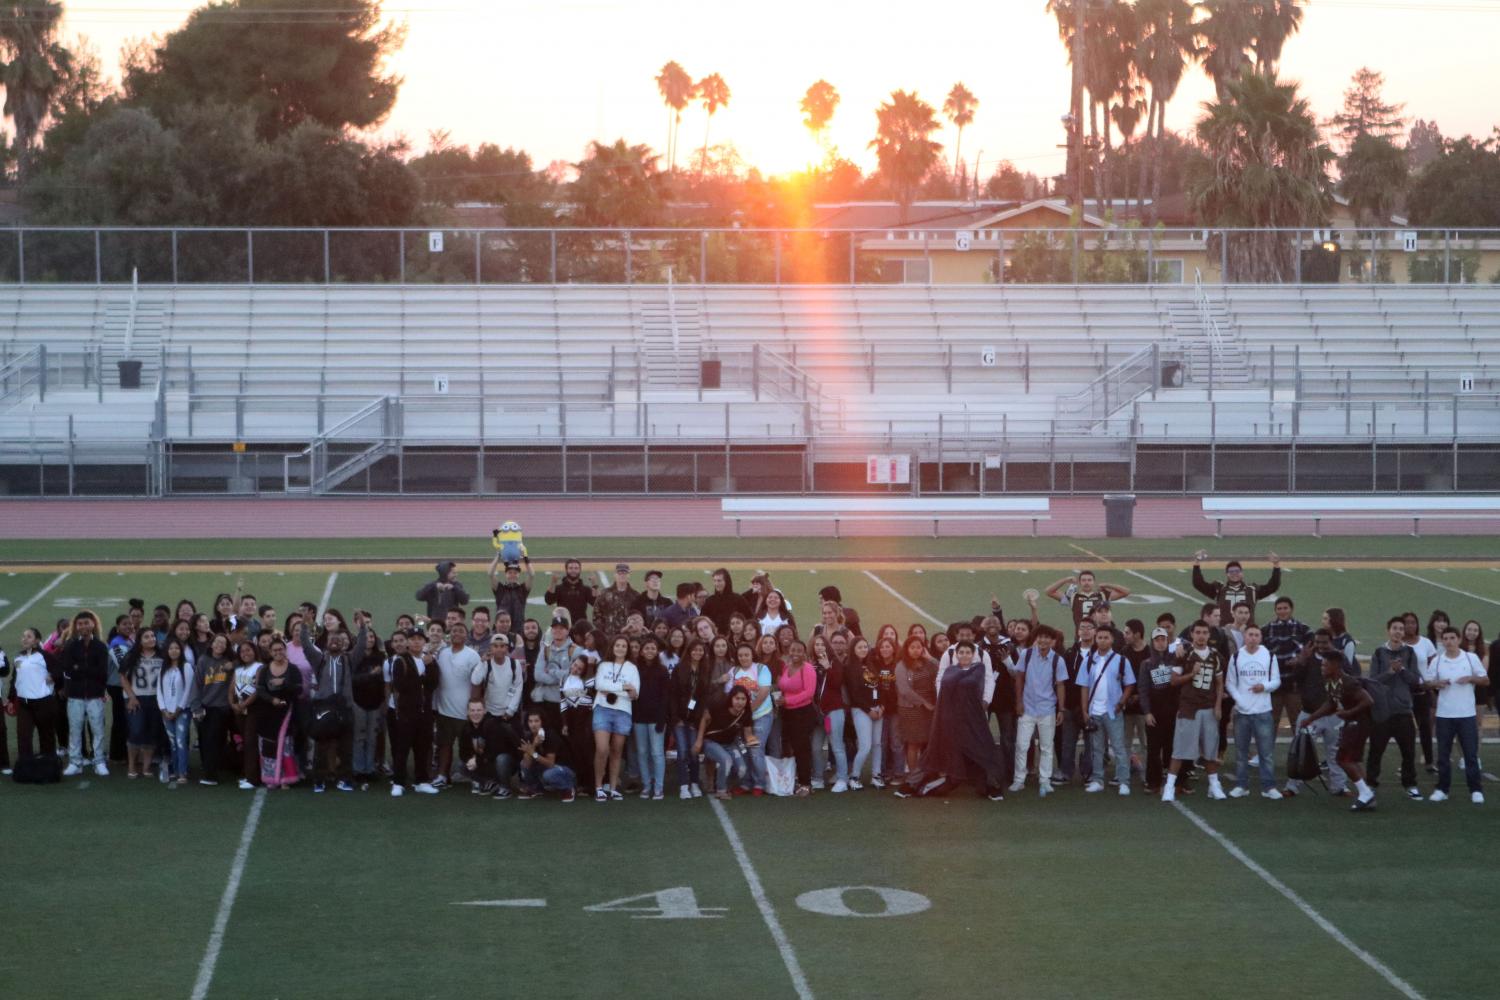 The class of 2018 groups together to take a picture with the sunrise.